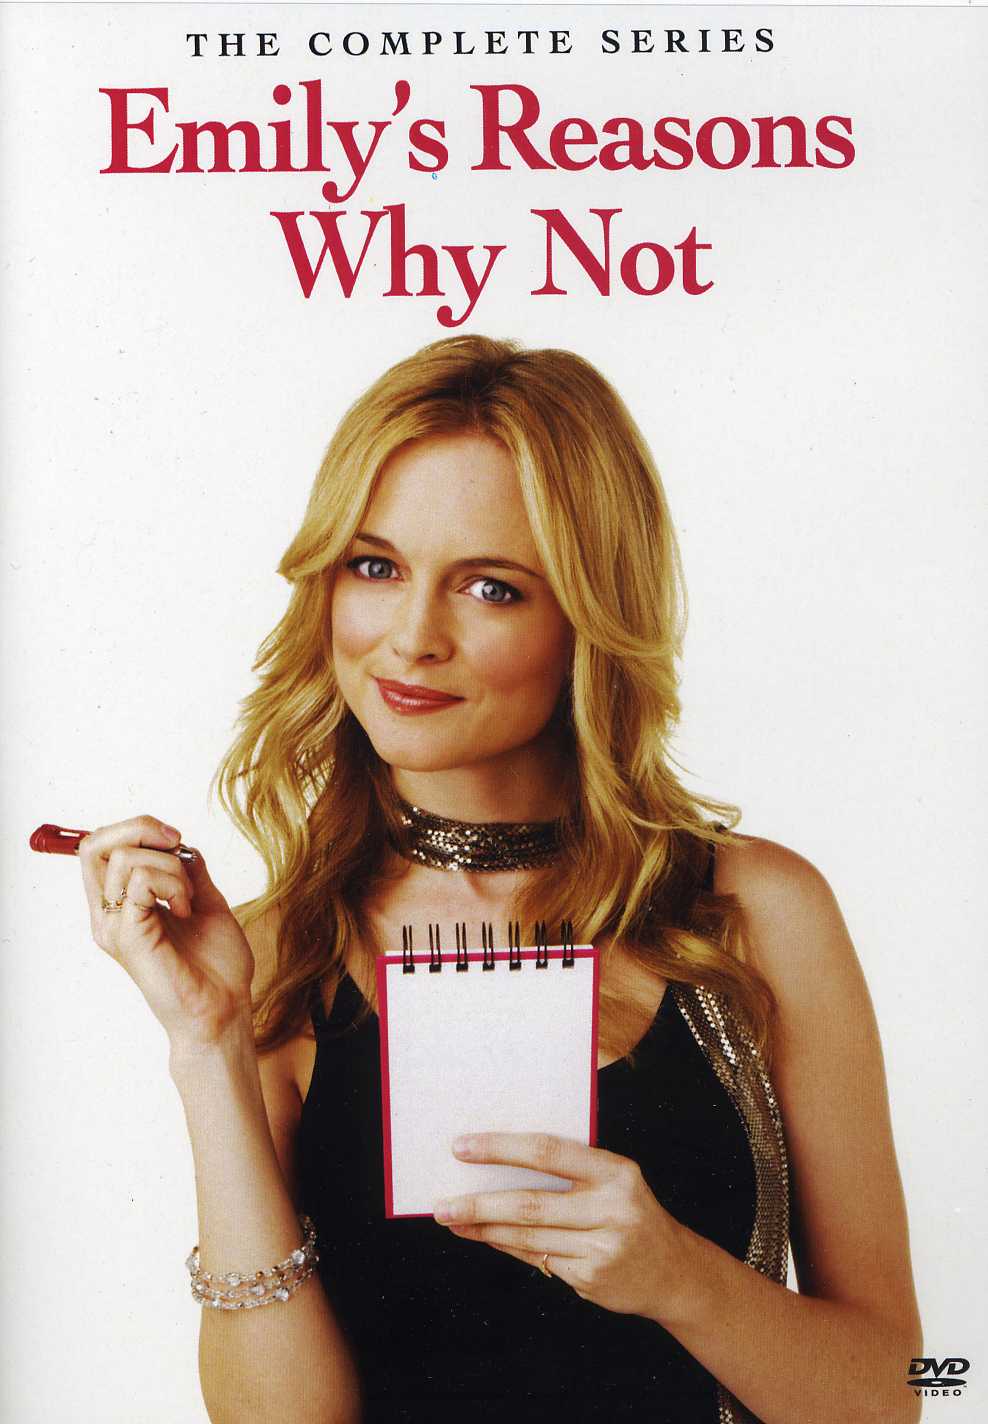 EMILY'S REASONS WHY NOT: THE COMPLETE SERIES